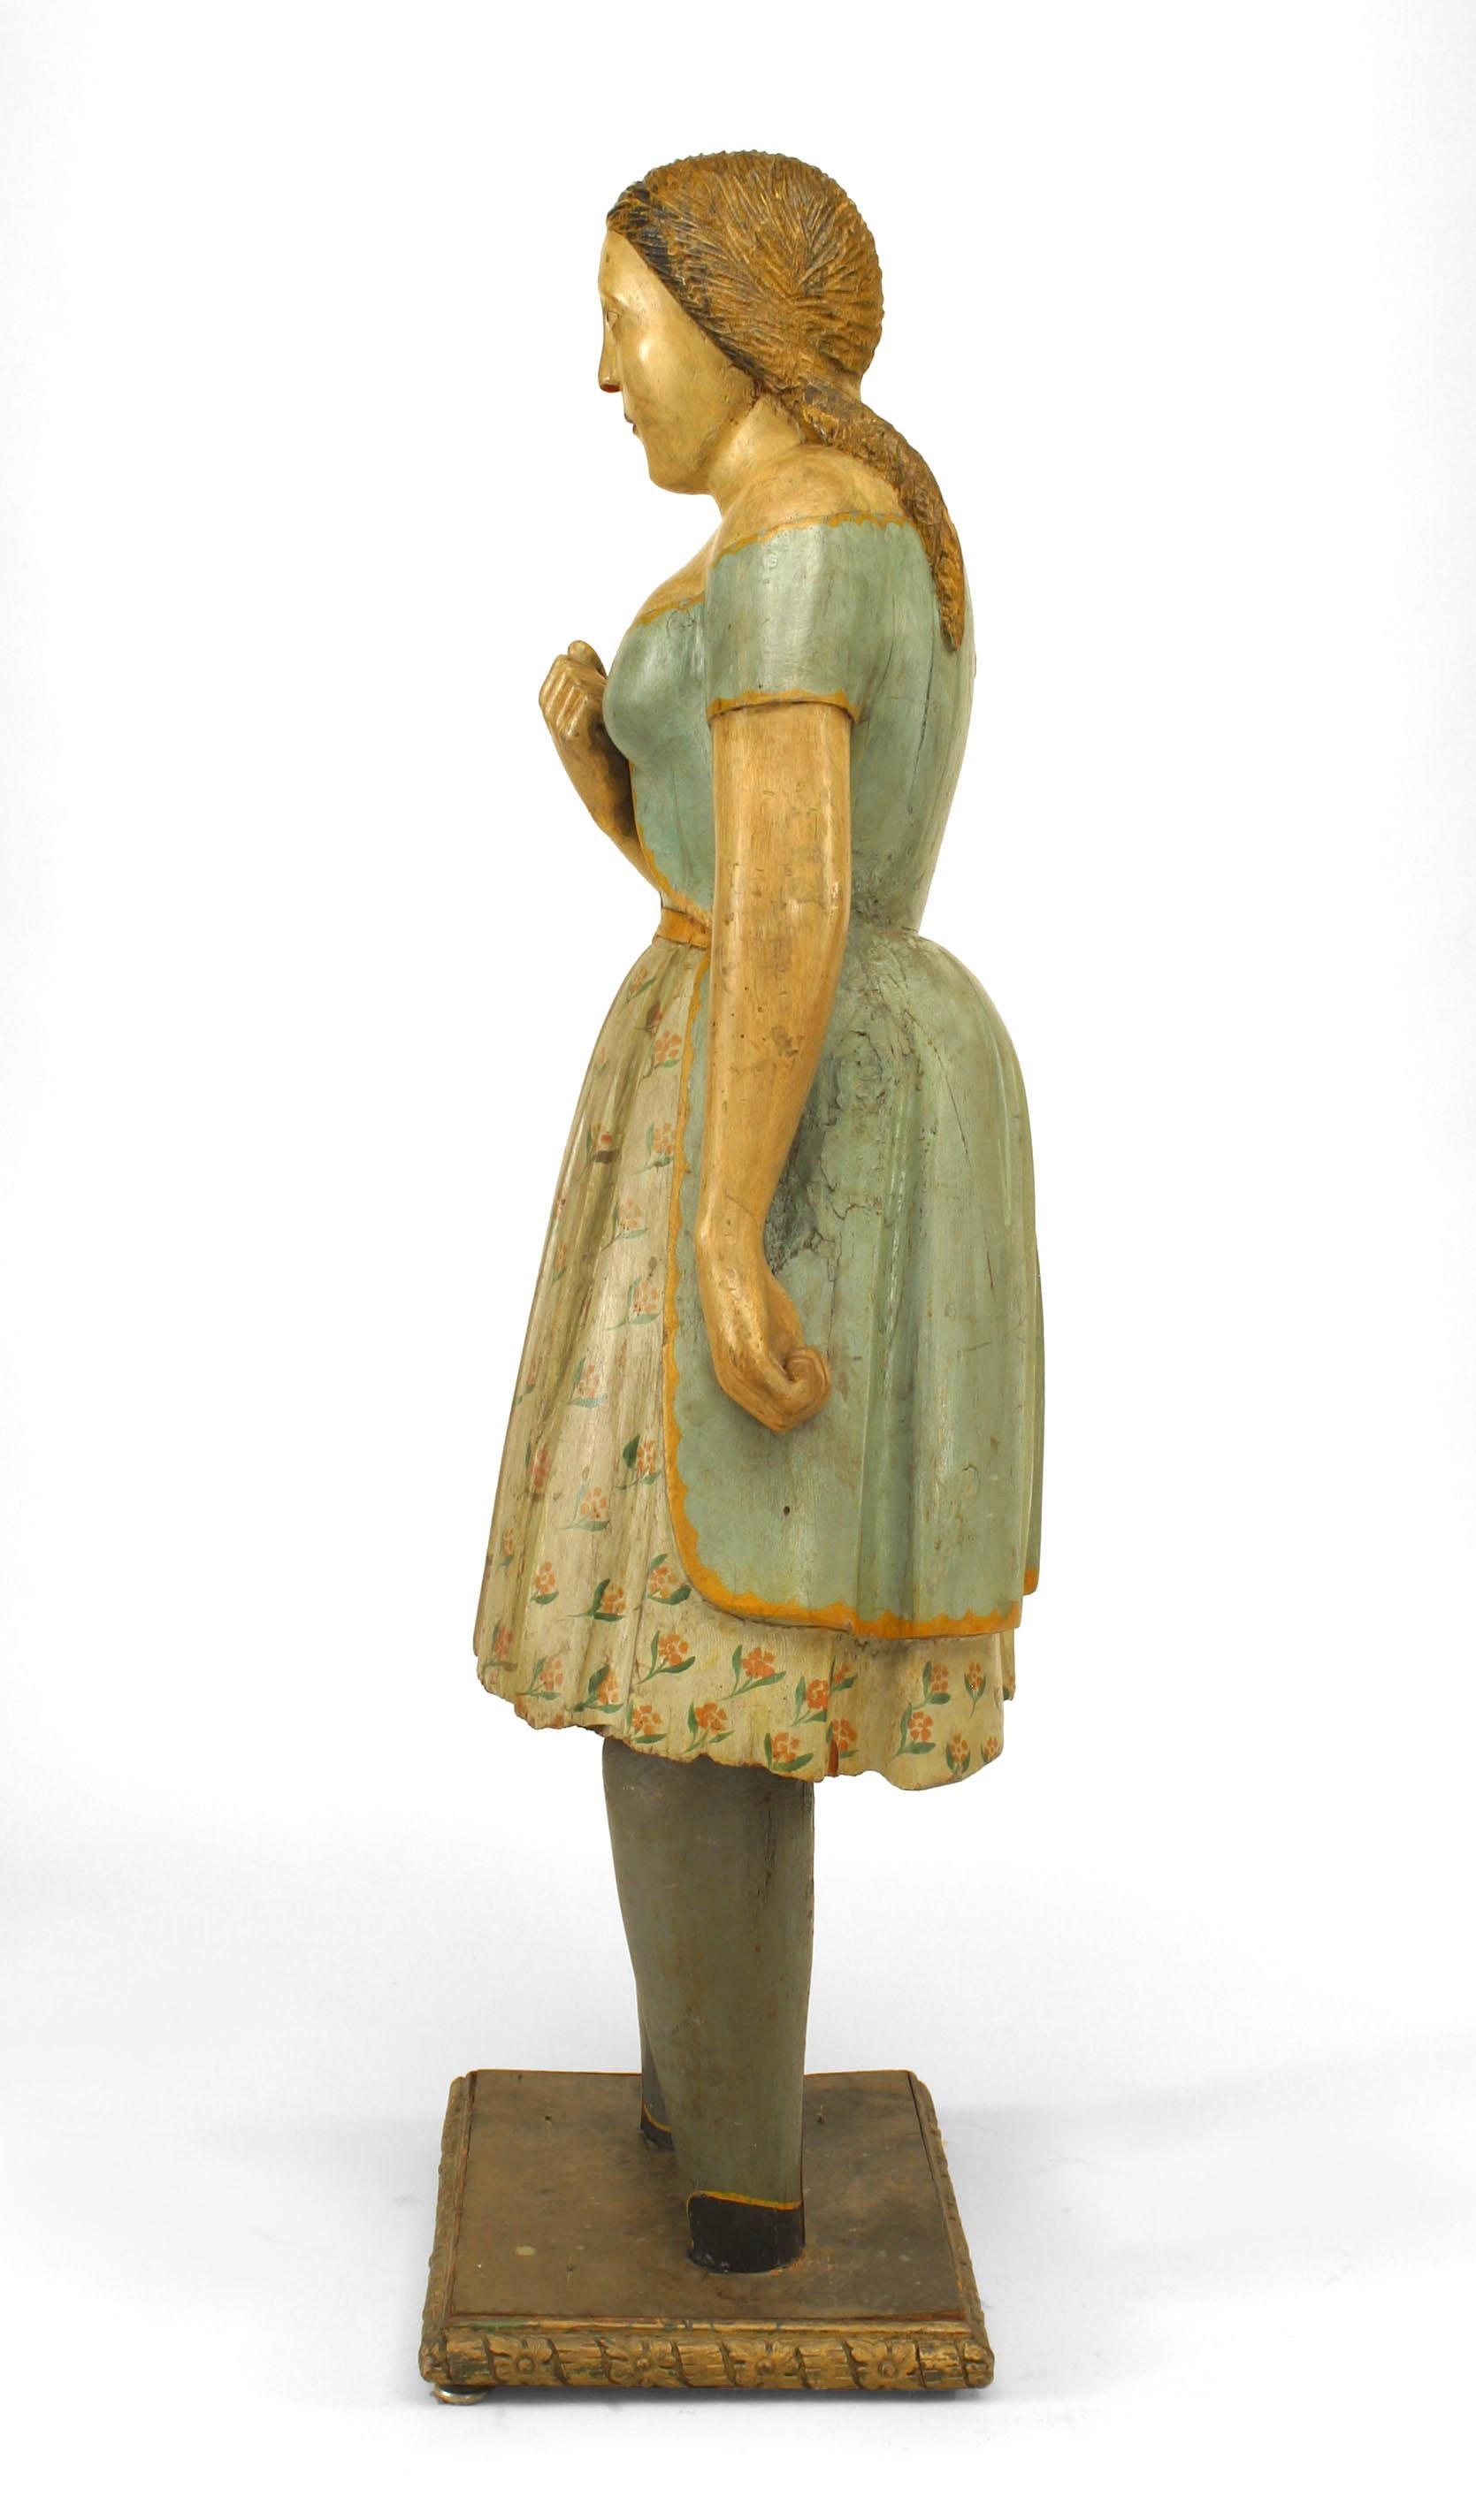 Hand-Painted Country Style Wooden Girl Figure For Sale